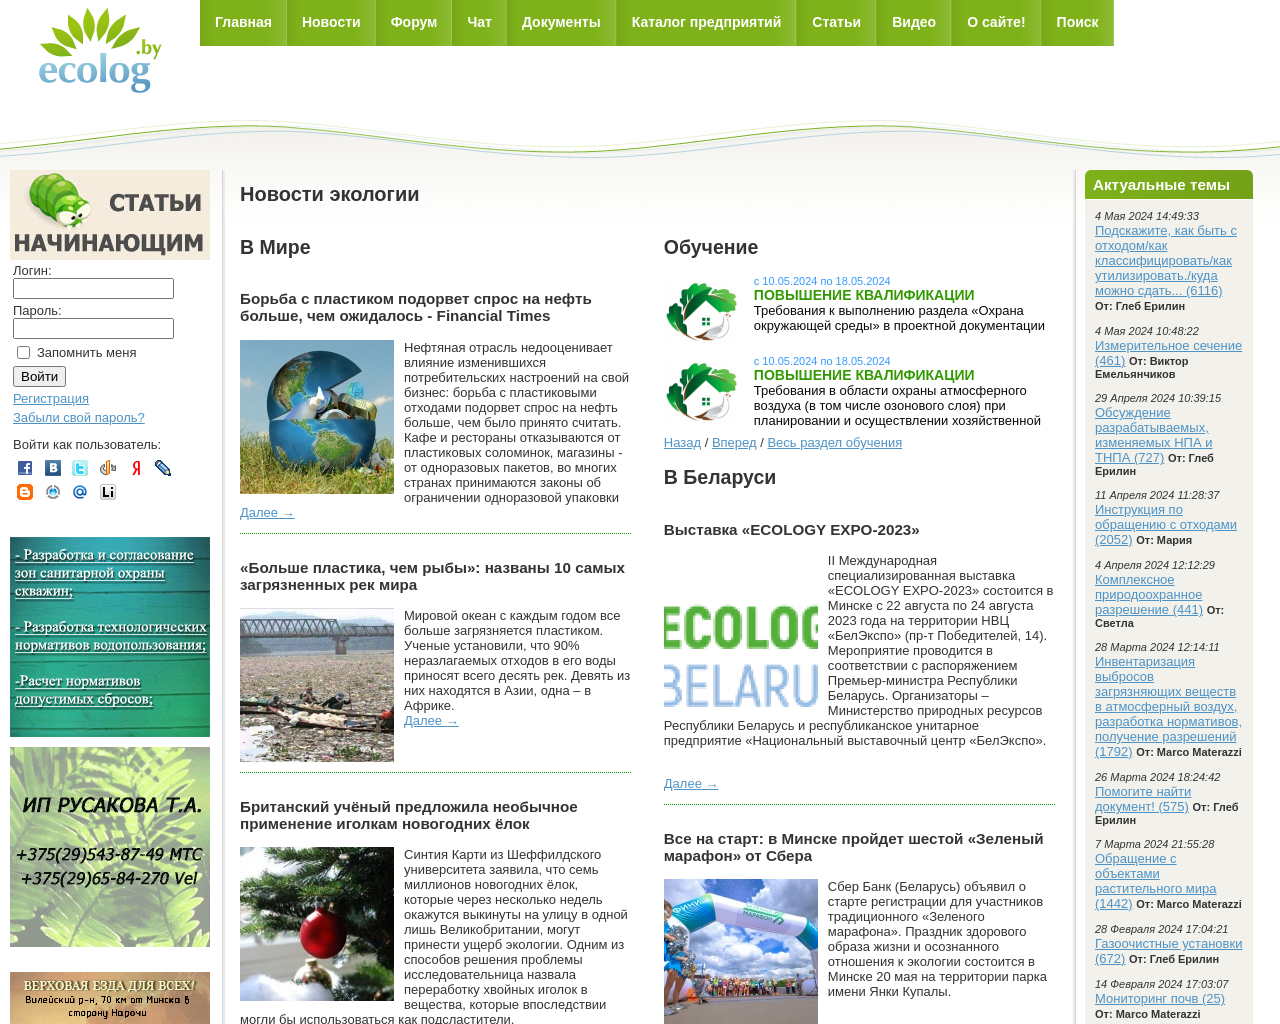 ecolog.by